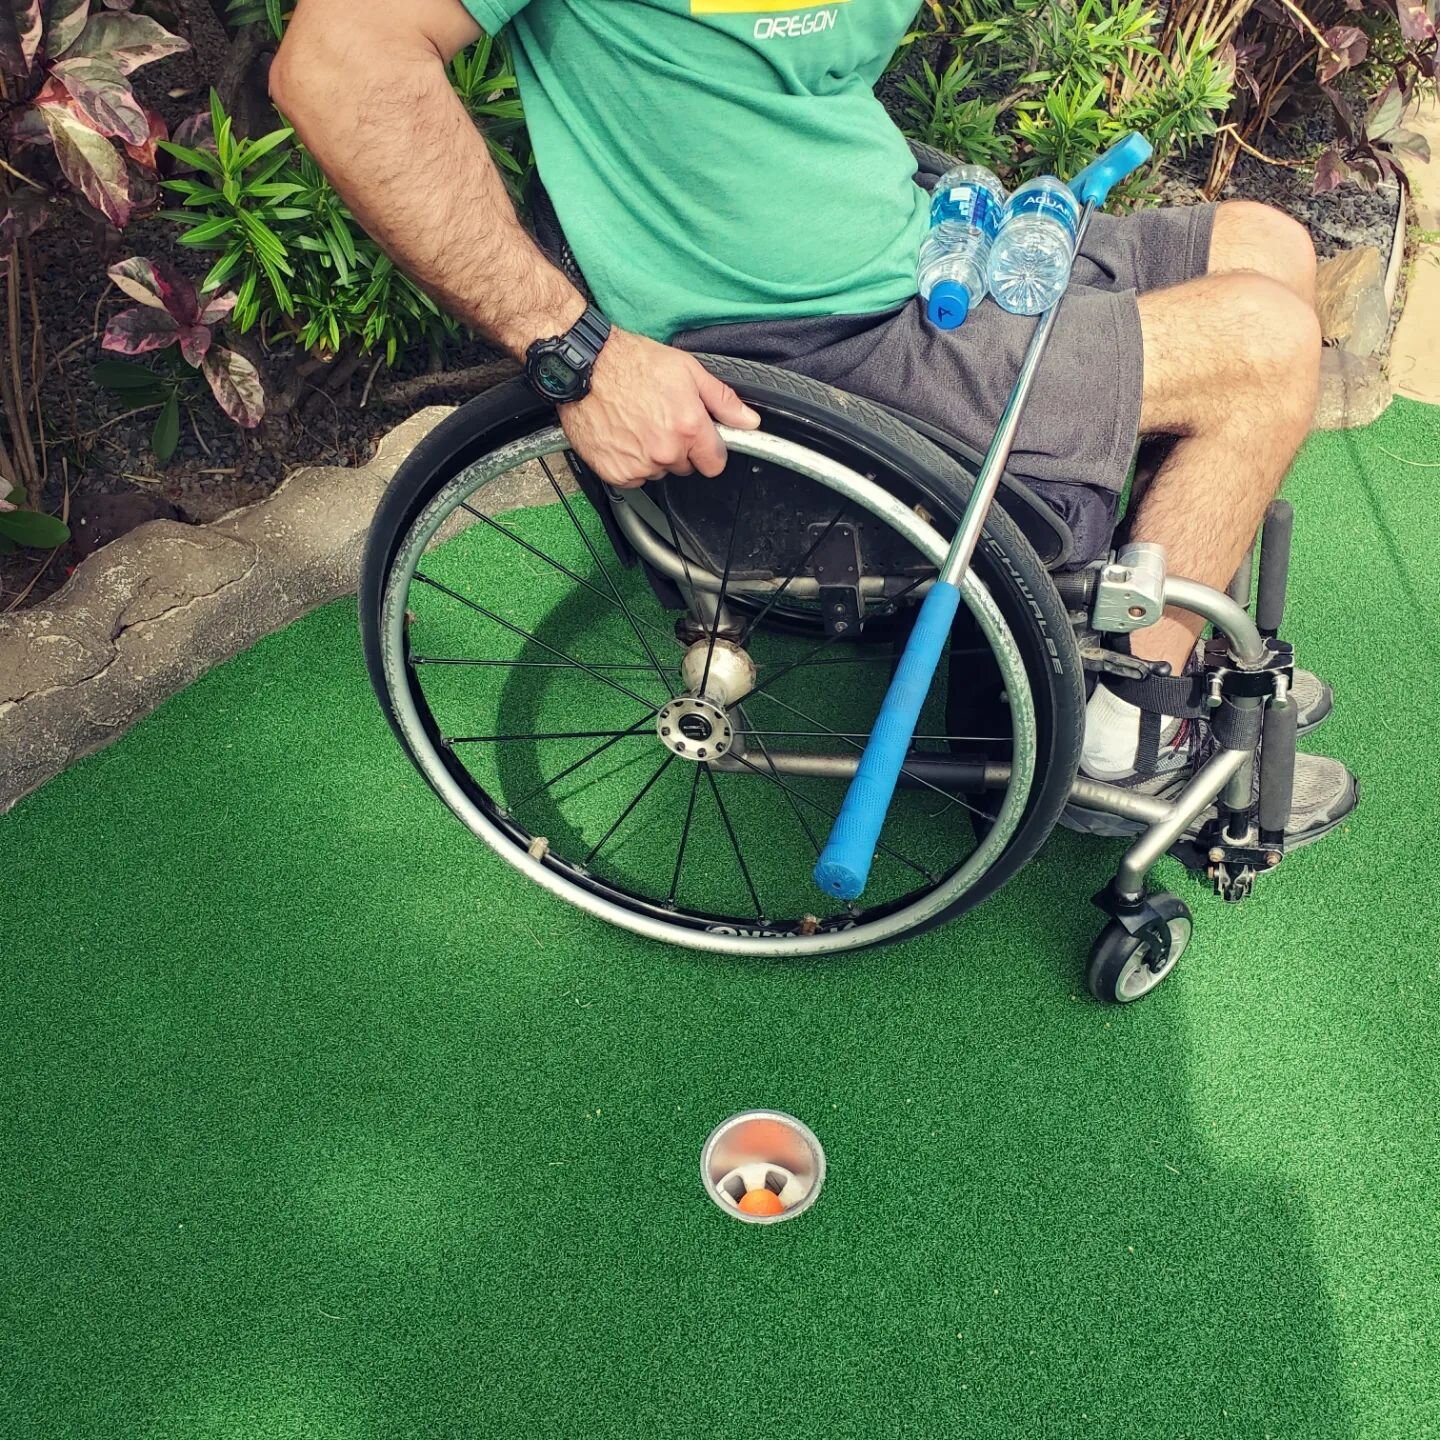 Did you know our local mini-golf course has a wheelchair accessible-ish option? We tried it out a while back. We had a great time. The course won't be great for every wheelchair user due to uneven ground in several spots (to make each hole it's own c